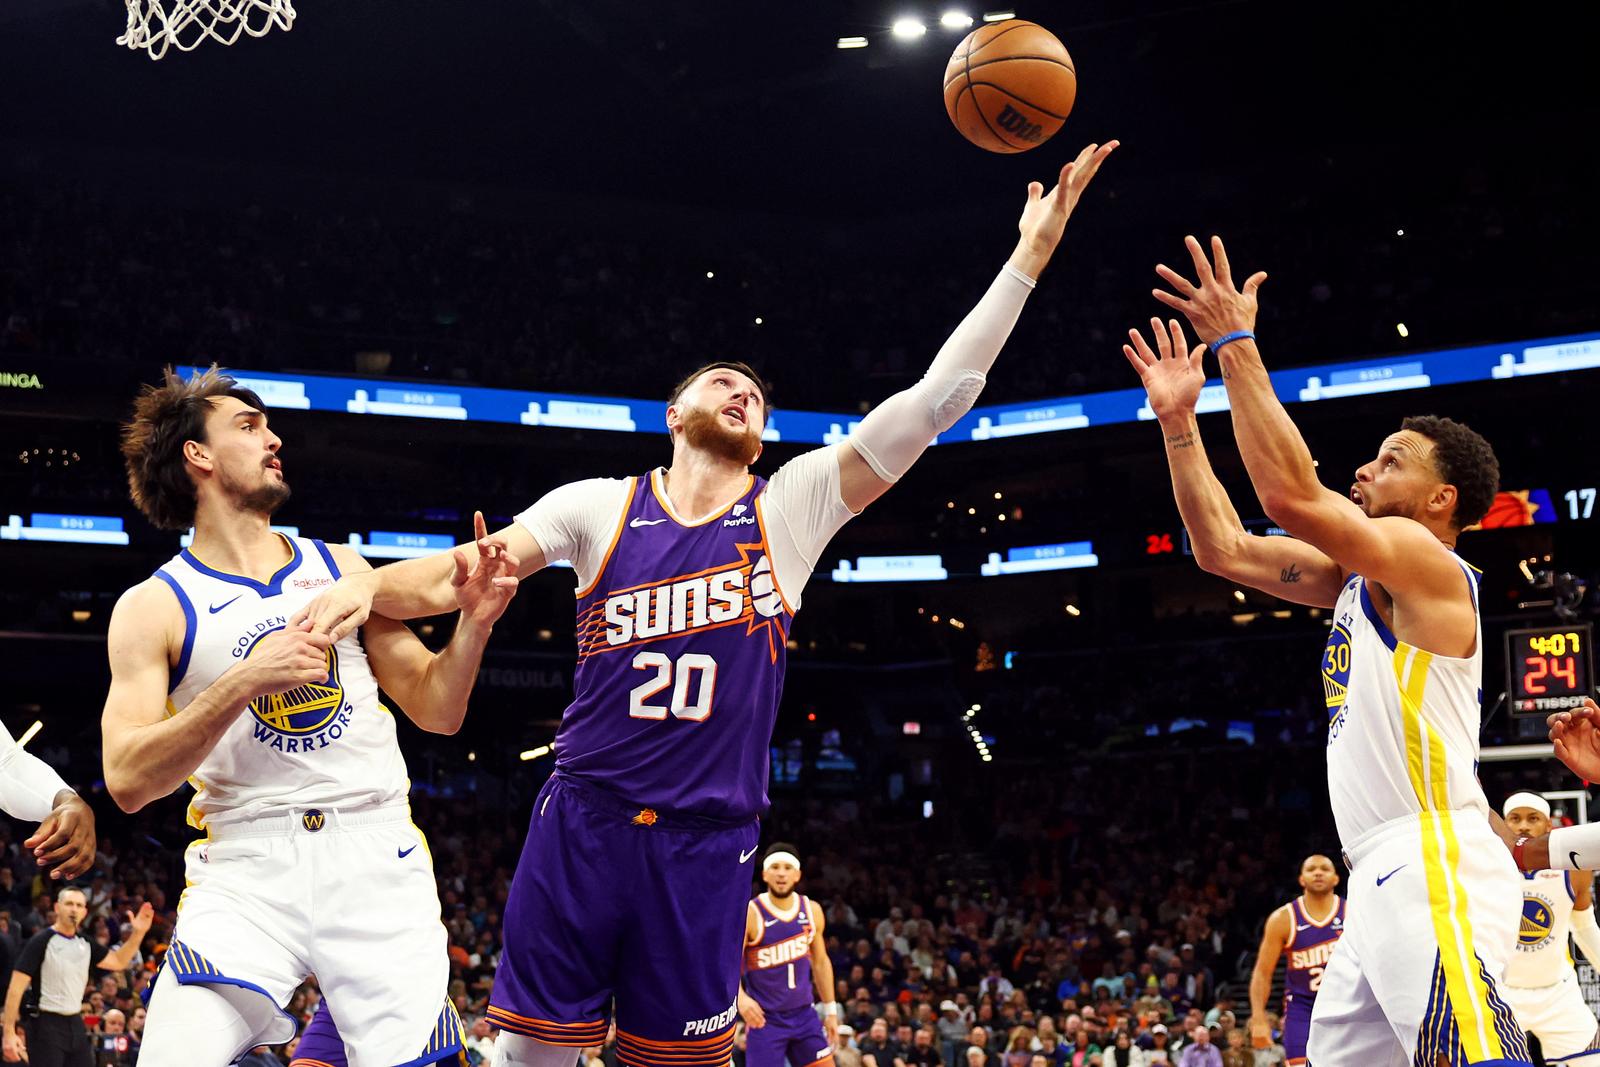 Dec 12, 2023; Phoenix, Arizona, USA; Phoenix Suns center Jusuf Nurkic (20) yes for a rebound against Golden State Warriors forward Dario Saric (20) and guard Stephen Curry (30) during the first quarter at Footprint Center. Mandatory Credit: Mark J. Rebilas-USA TODAY Sports Photo: Mark J. Rebilas/REUTERS